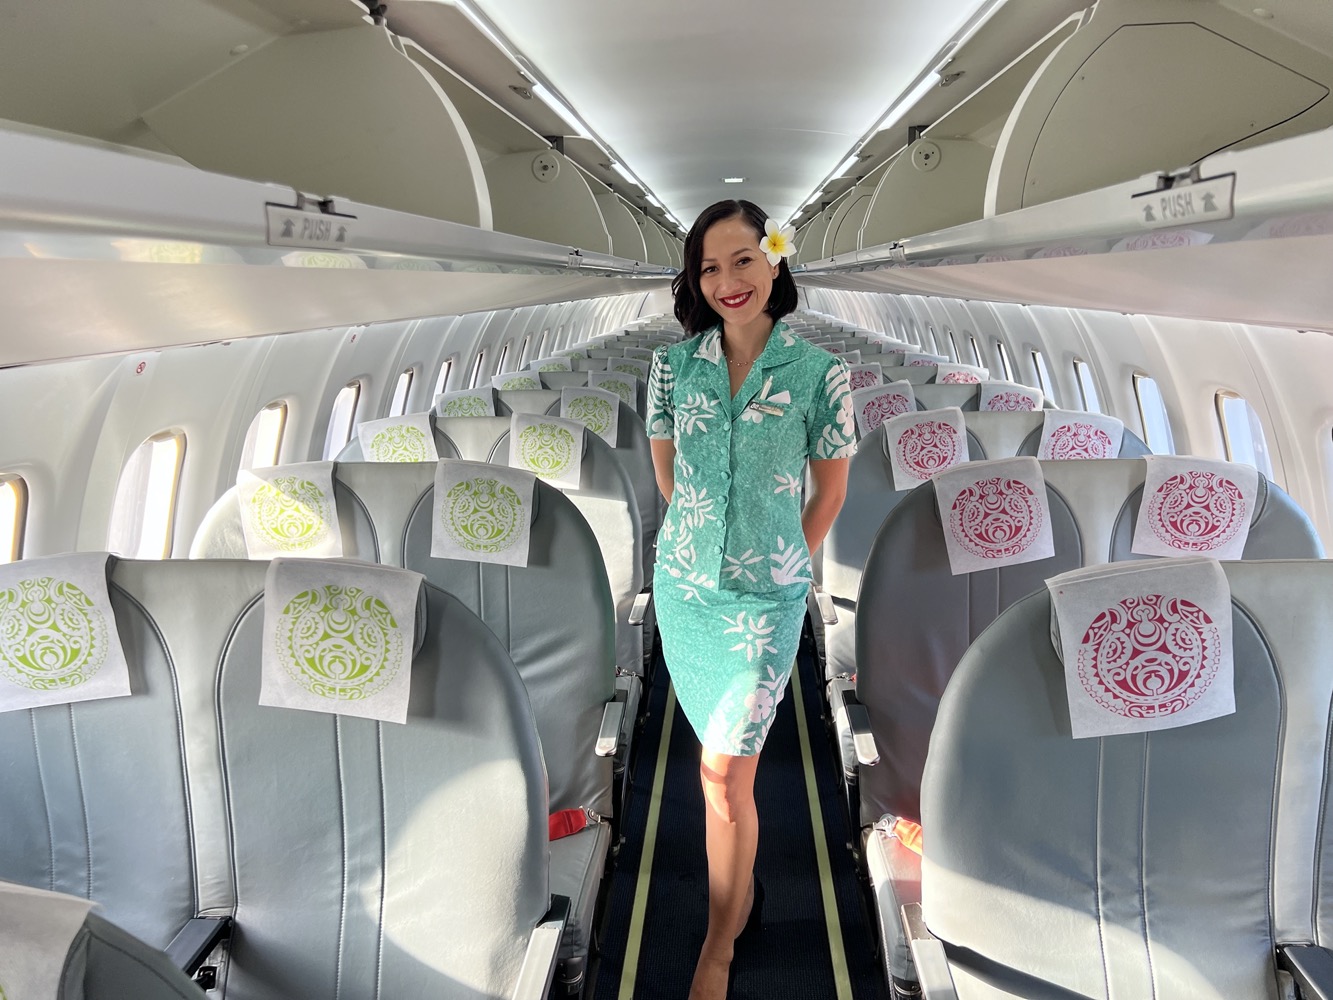 a woman in a dress standing in an airplane